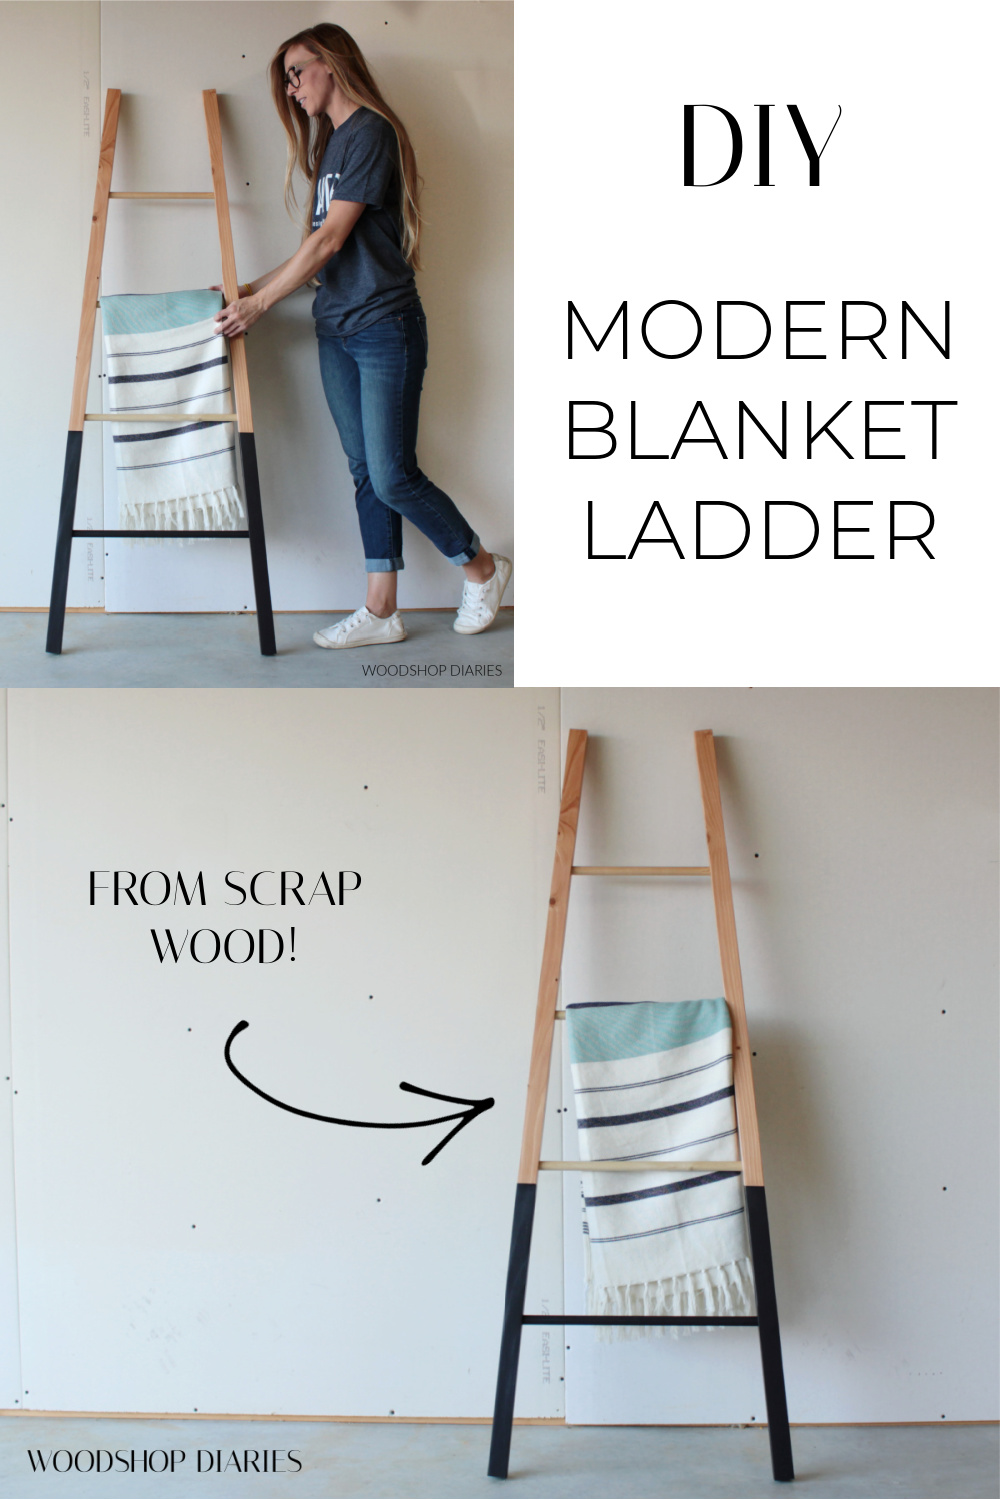 Pinterest image showing Shara Woodshop Diaries adjusting blanket on ladder at top and two tone DIY blanket ladder leaning against wall at bottom with text DIY modern blanket ladder